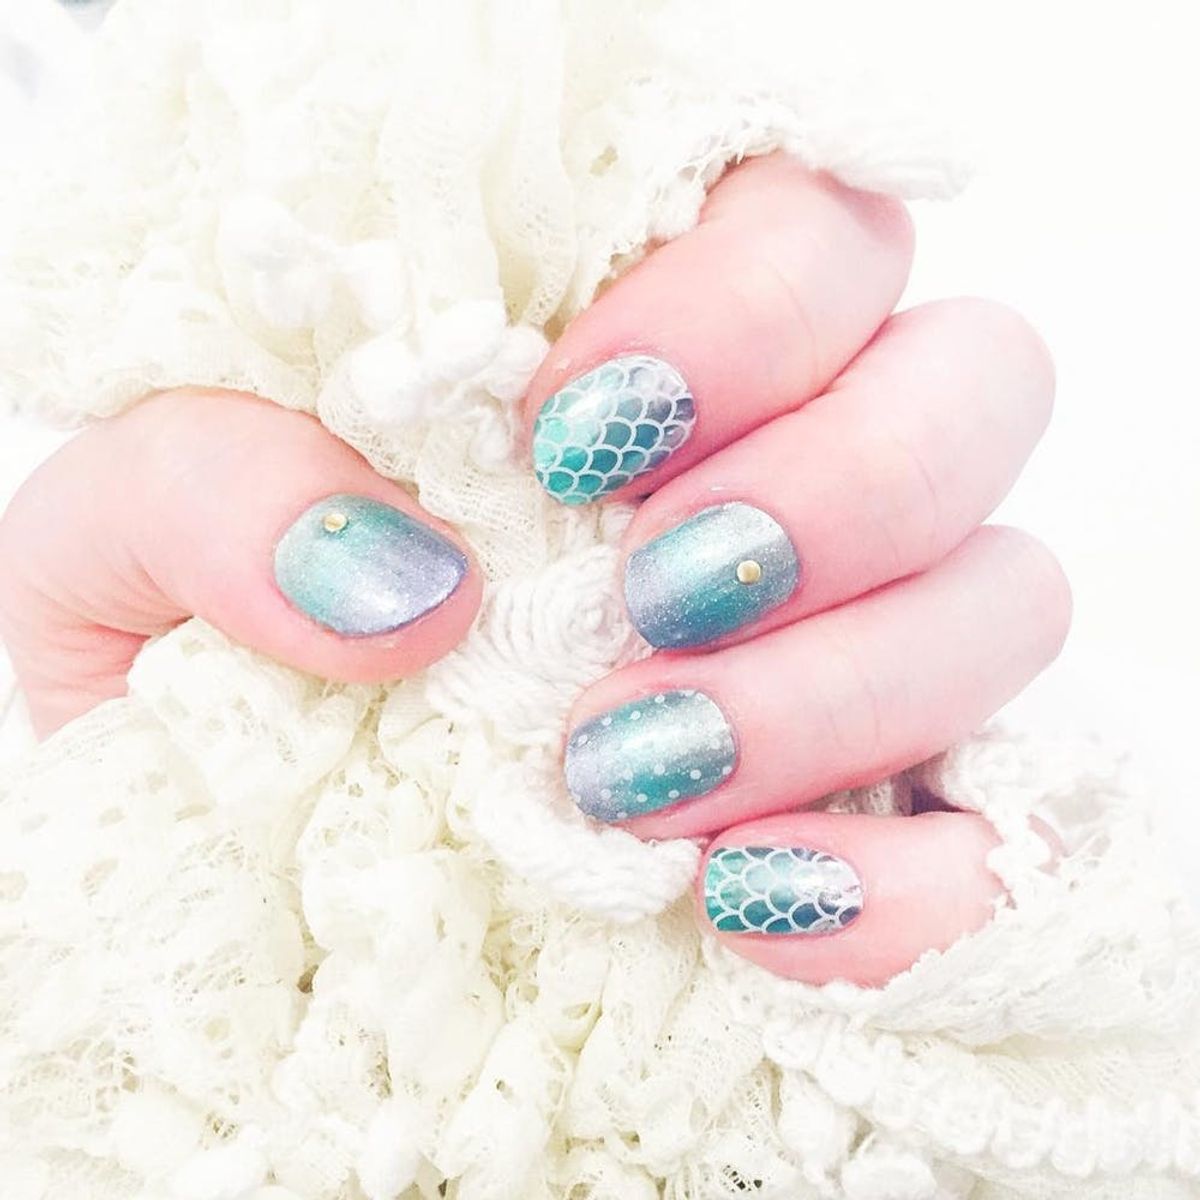 10 Mermaid Manis That Will Take Your Beach Look to the NEXT Level